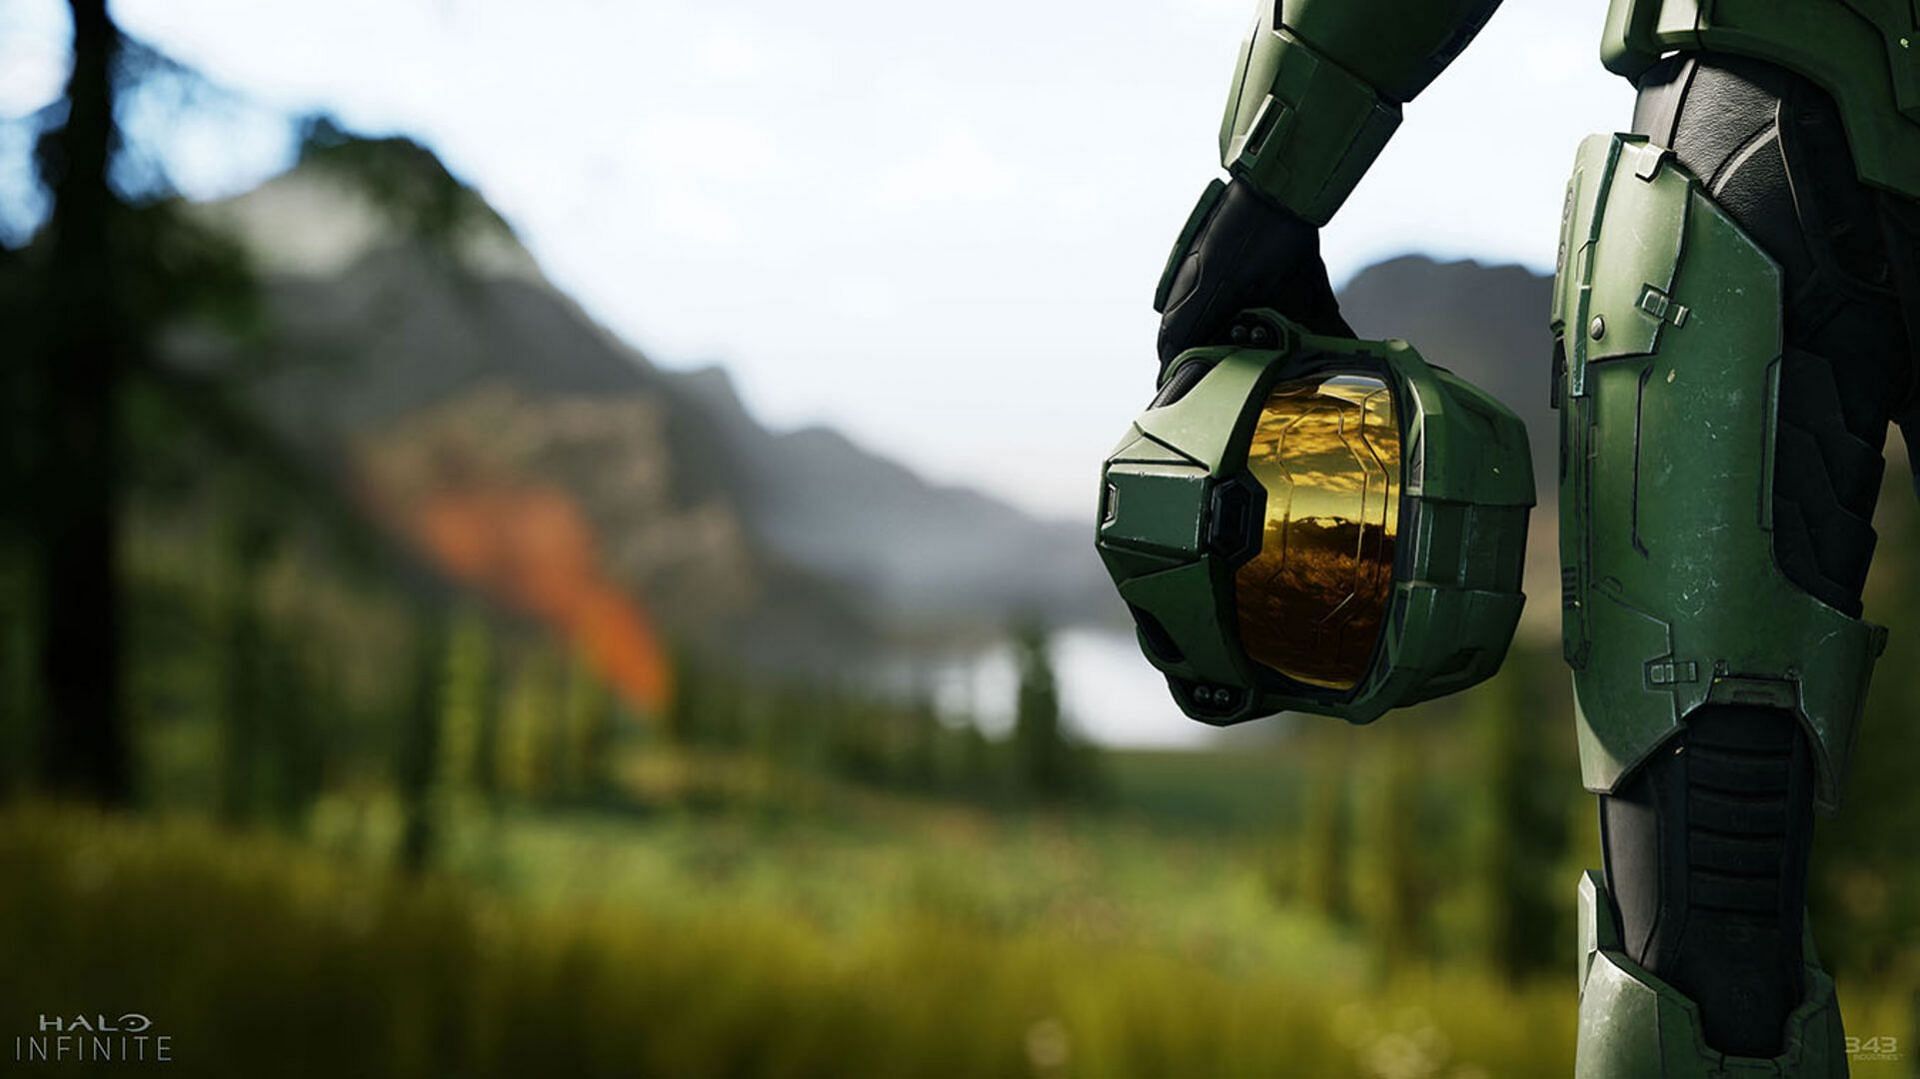 Halo Infinite is the most recent game in this franchise (Image via 343 Industries)